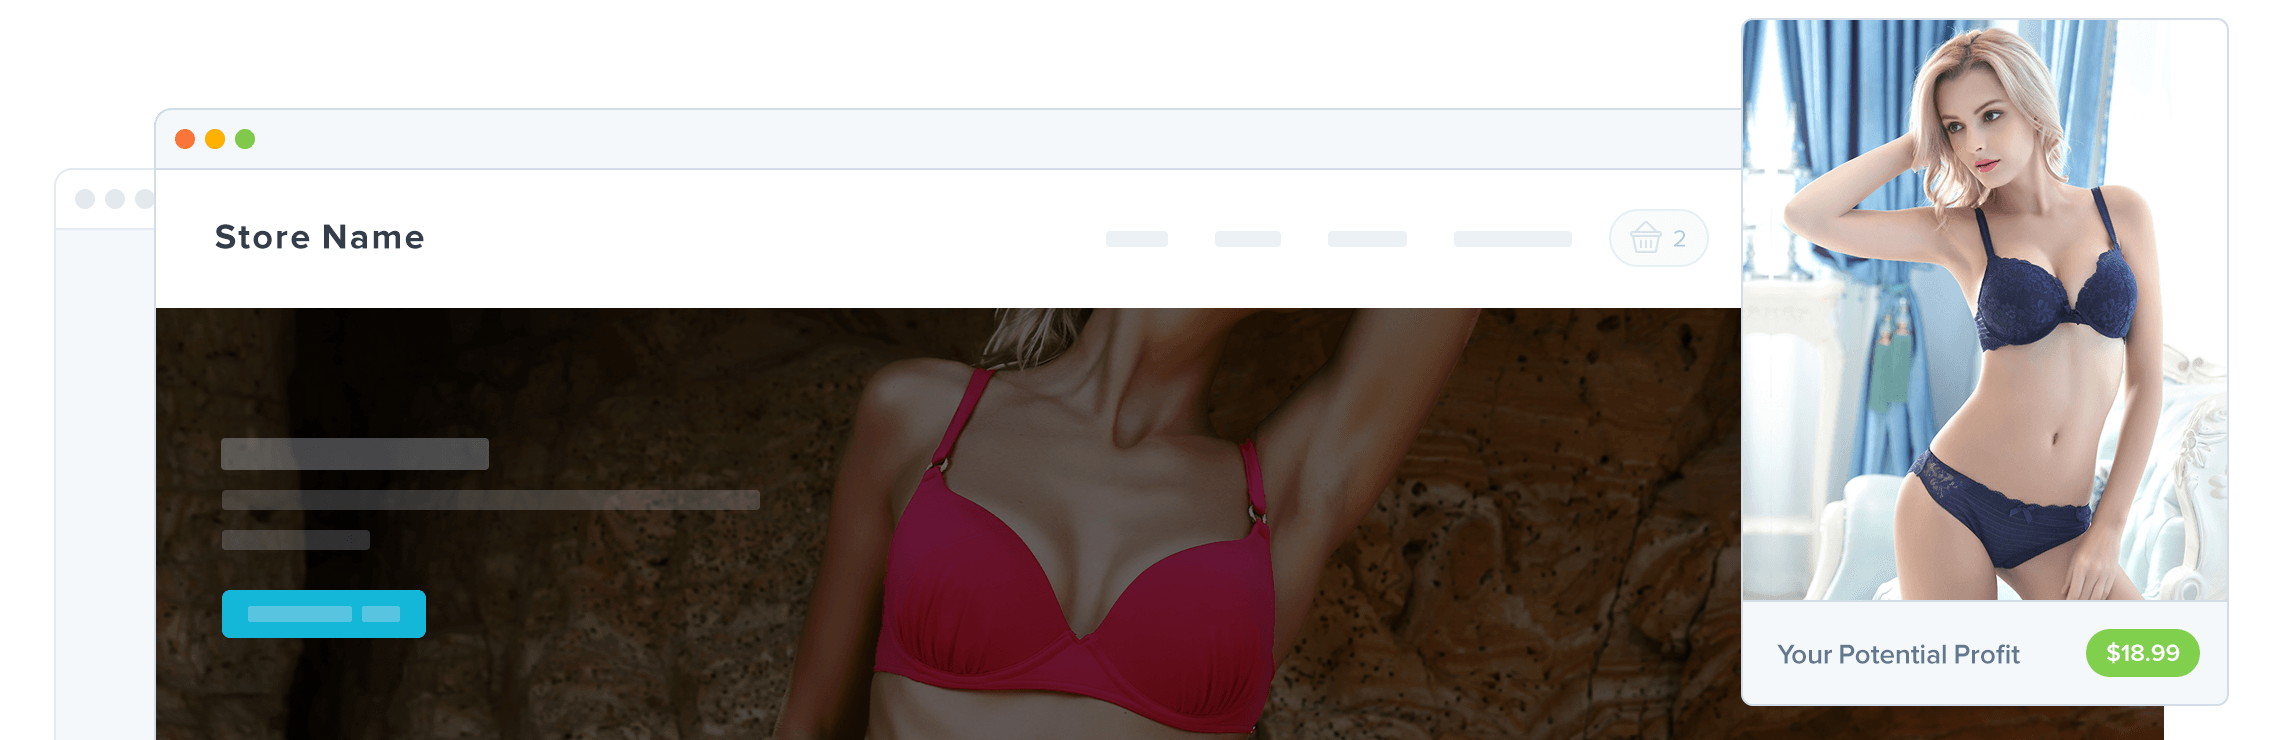 Dropshipping lingerie